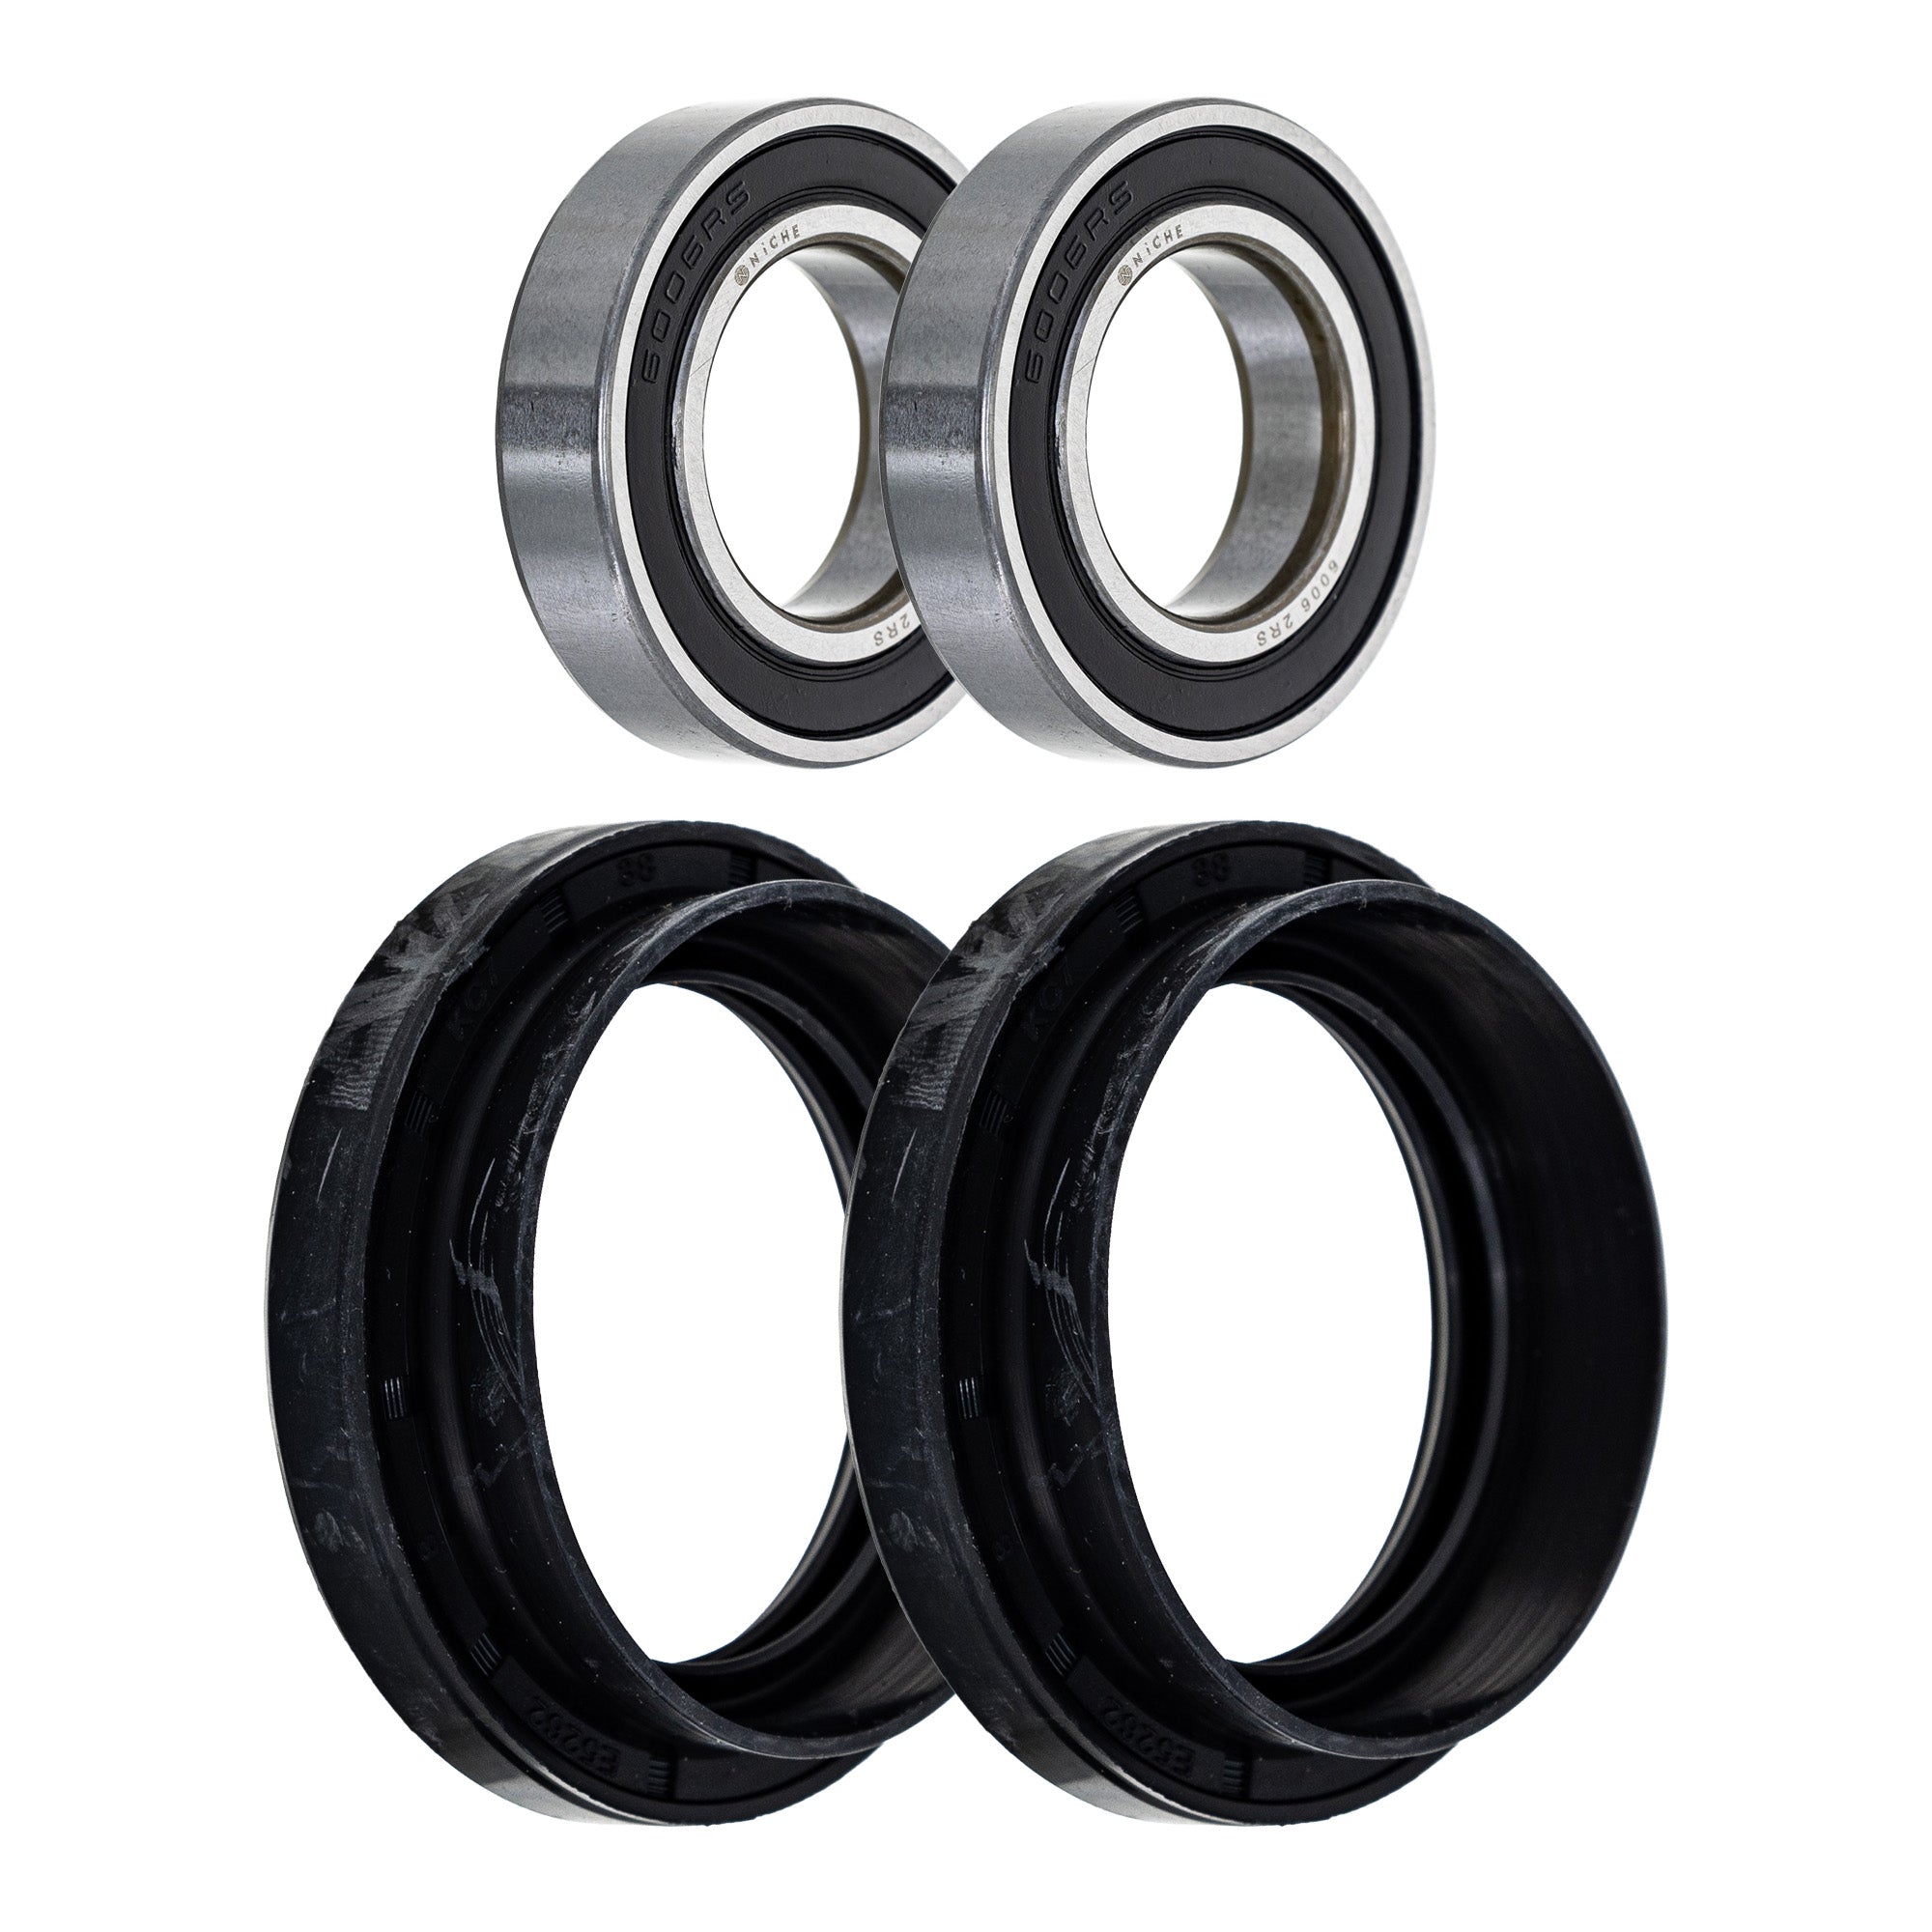 Wheel Bearing Seal Kit for zOTHER Grizzly NICHE MK1009166